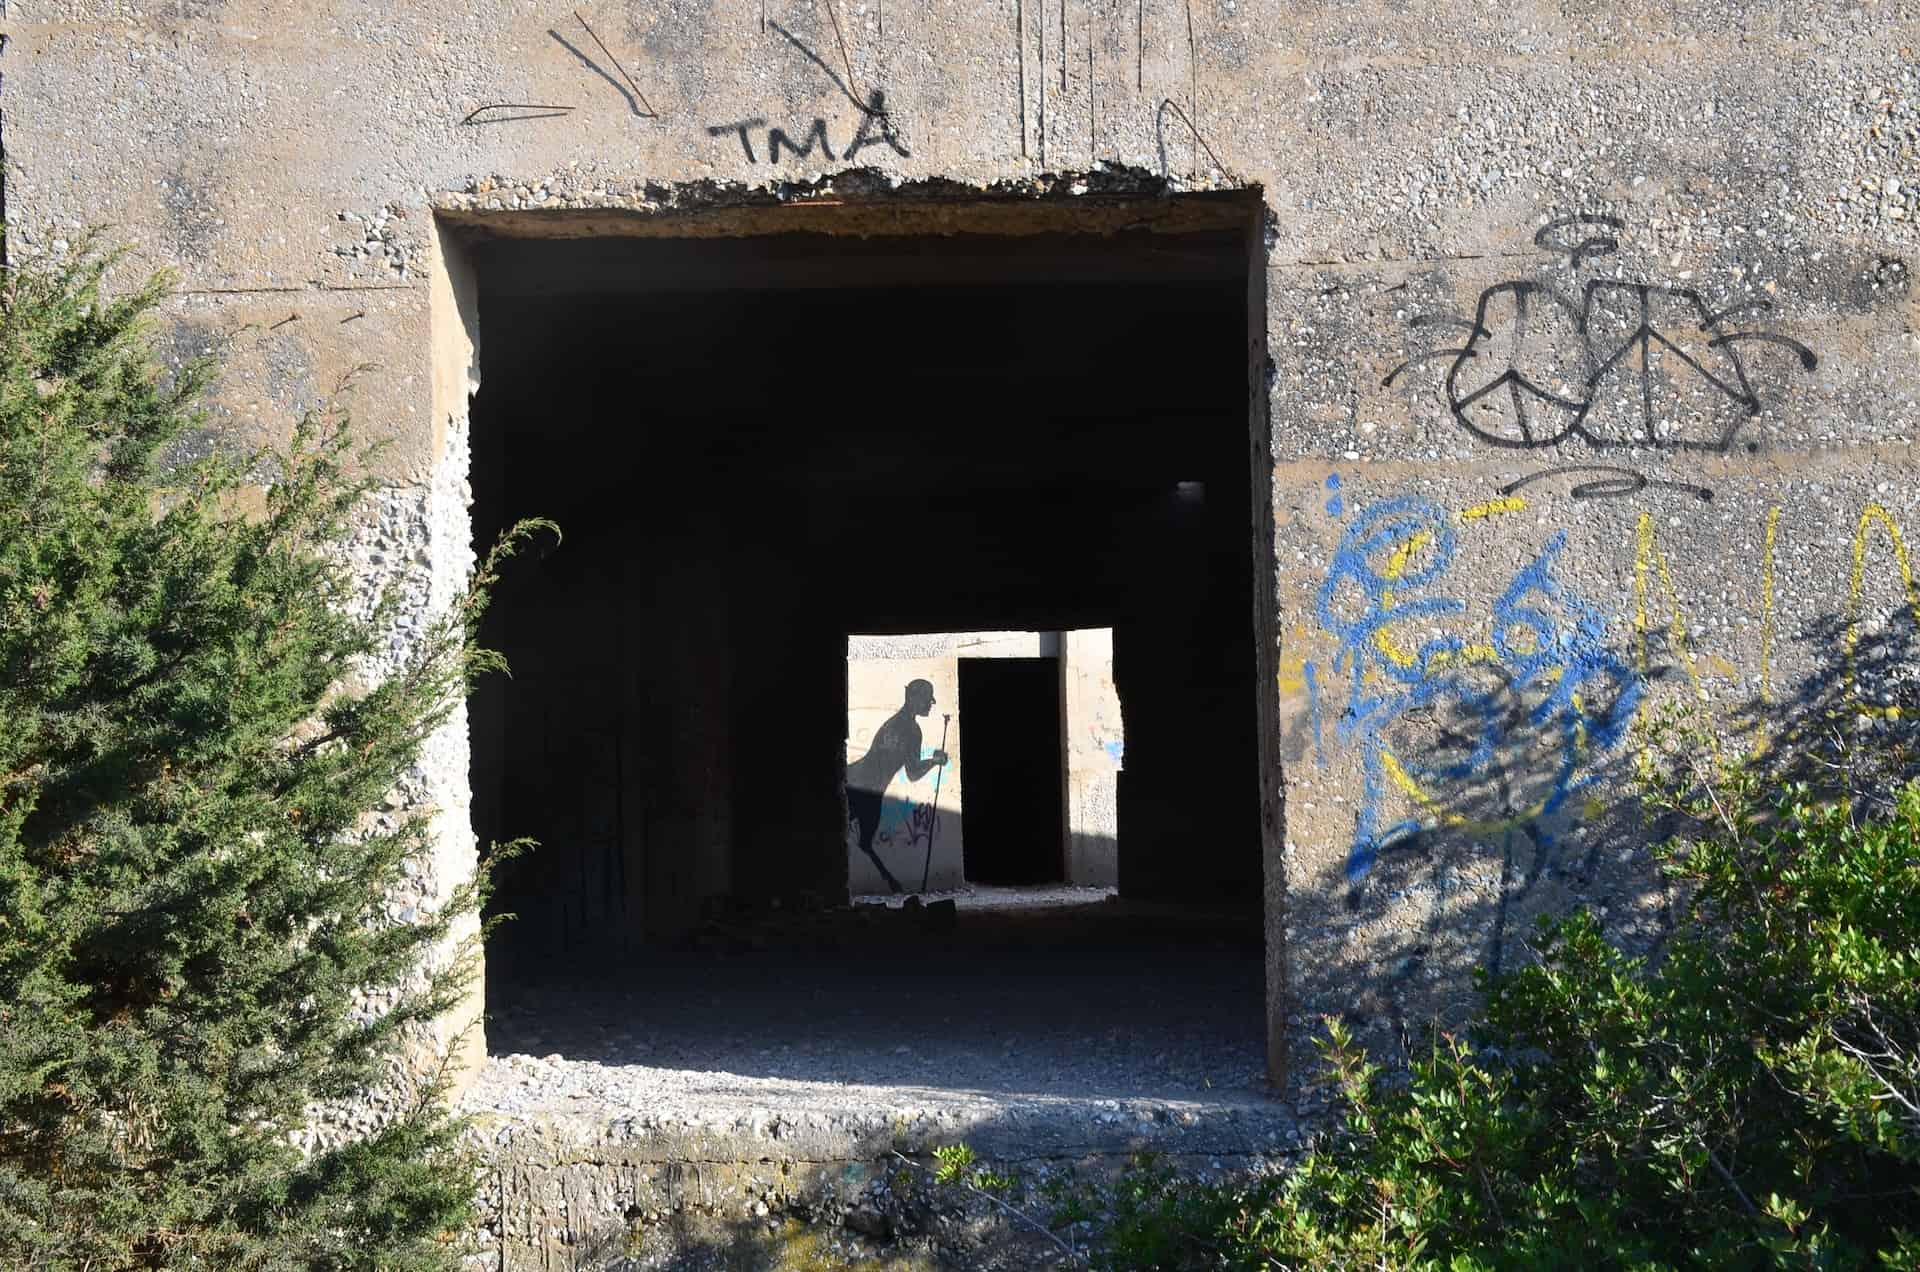 Looking through one of the doors of the unfinished hotel